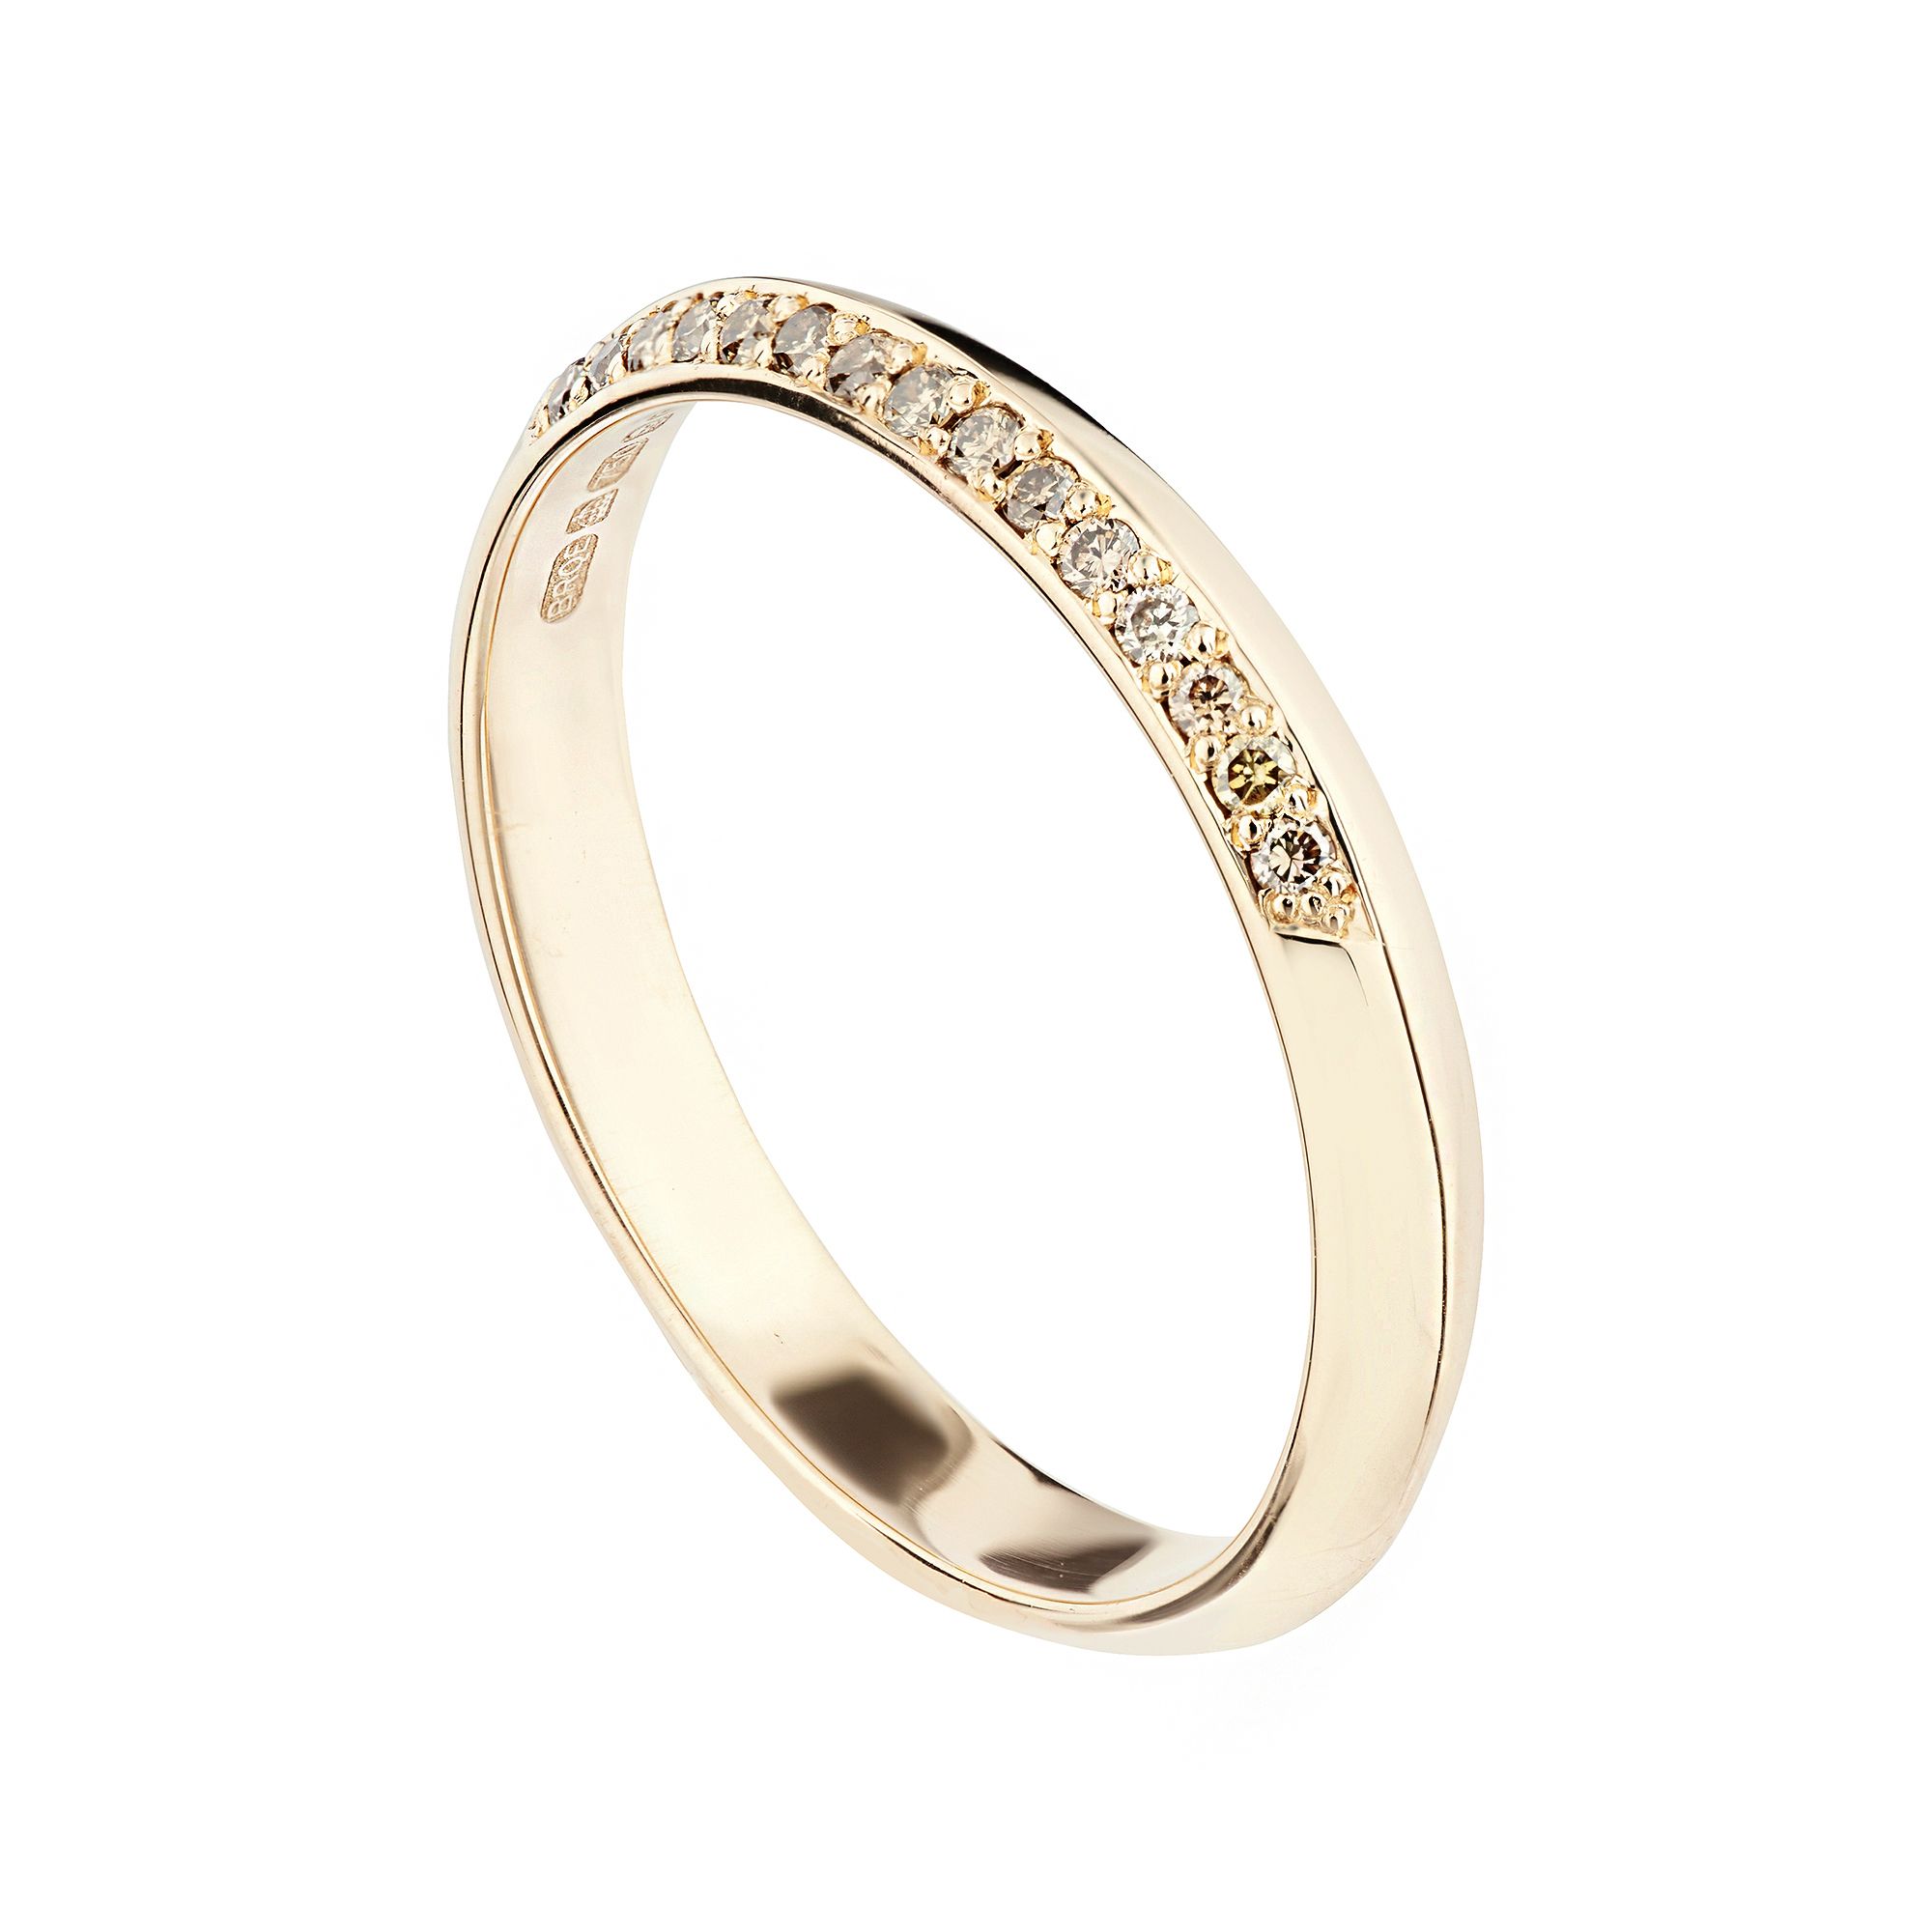 18ct Rose Gold Coco Fine Wedding Band One Third Set With Champagne Diamonds Pertaining To Most Popular Champagne Diamond Anniversary Bands In Rose Gold (View 23 of 25)